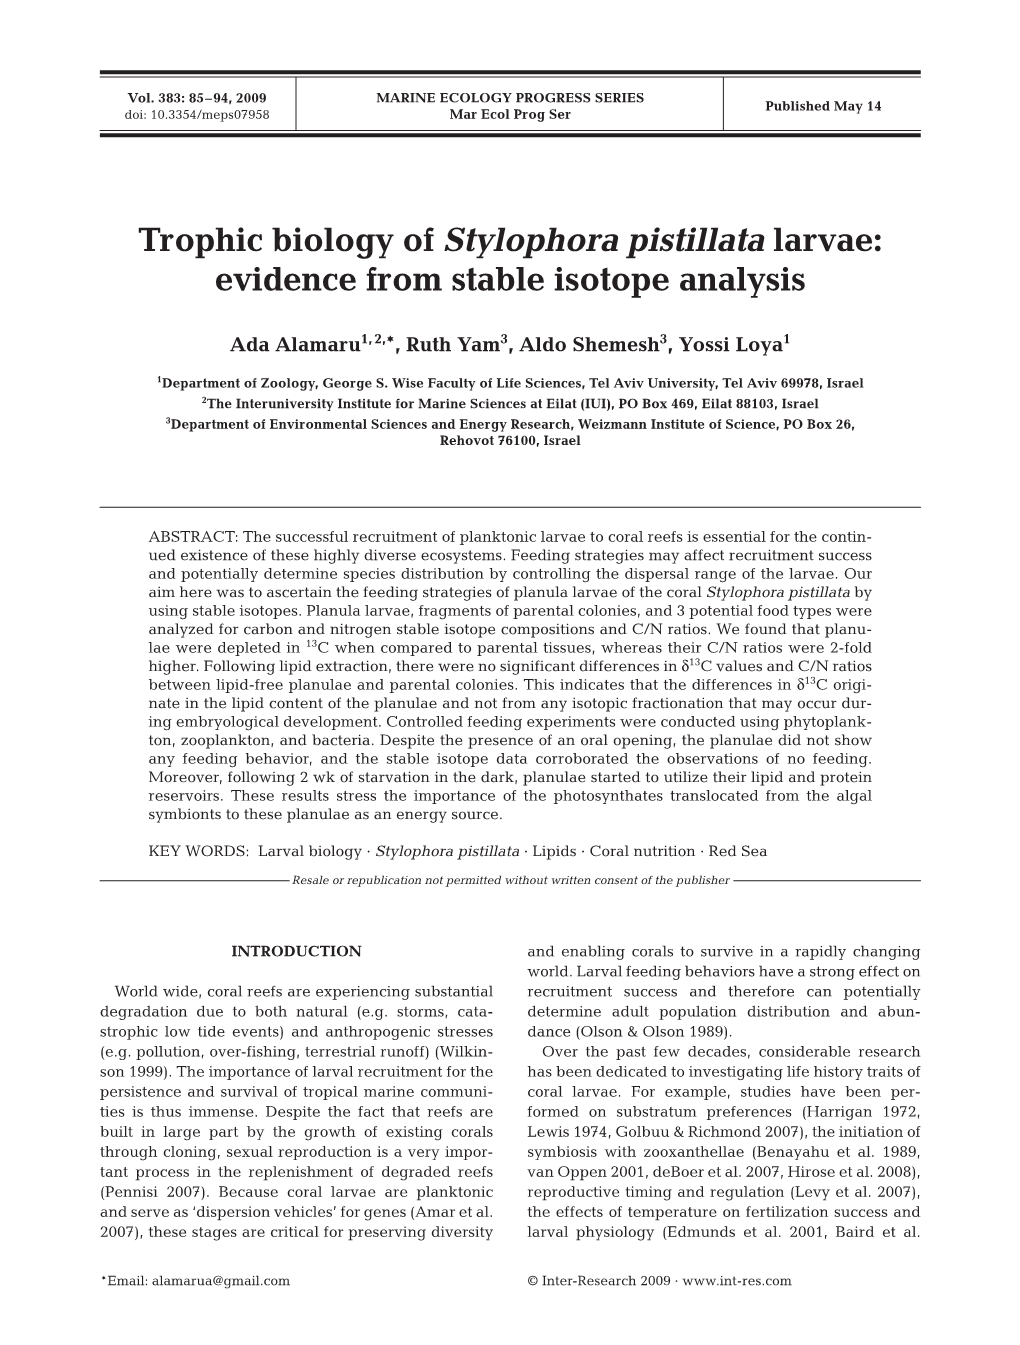 Trophic Biology of Stylophora Pistillata Larvae: Evidence from Stable Isotope Analysis